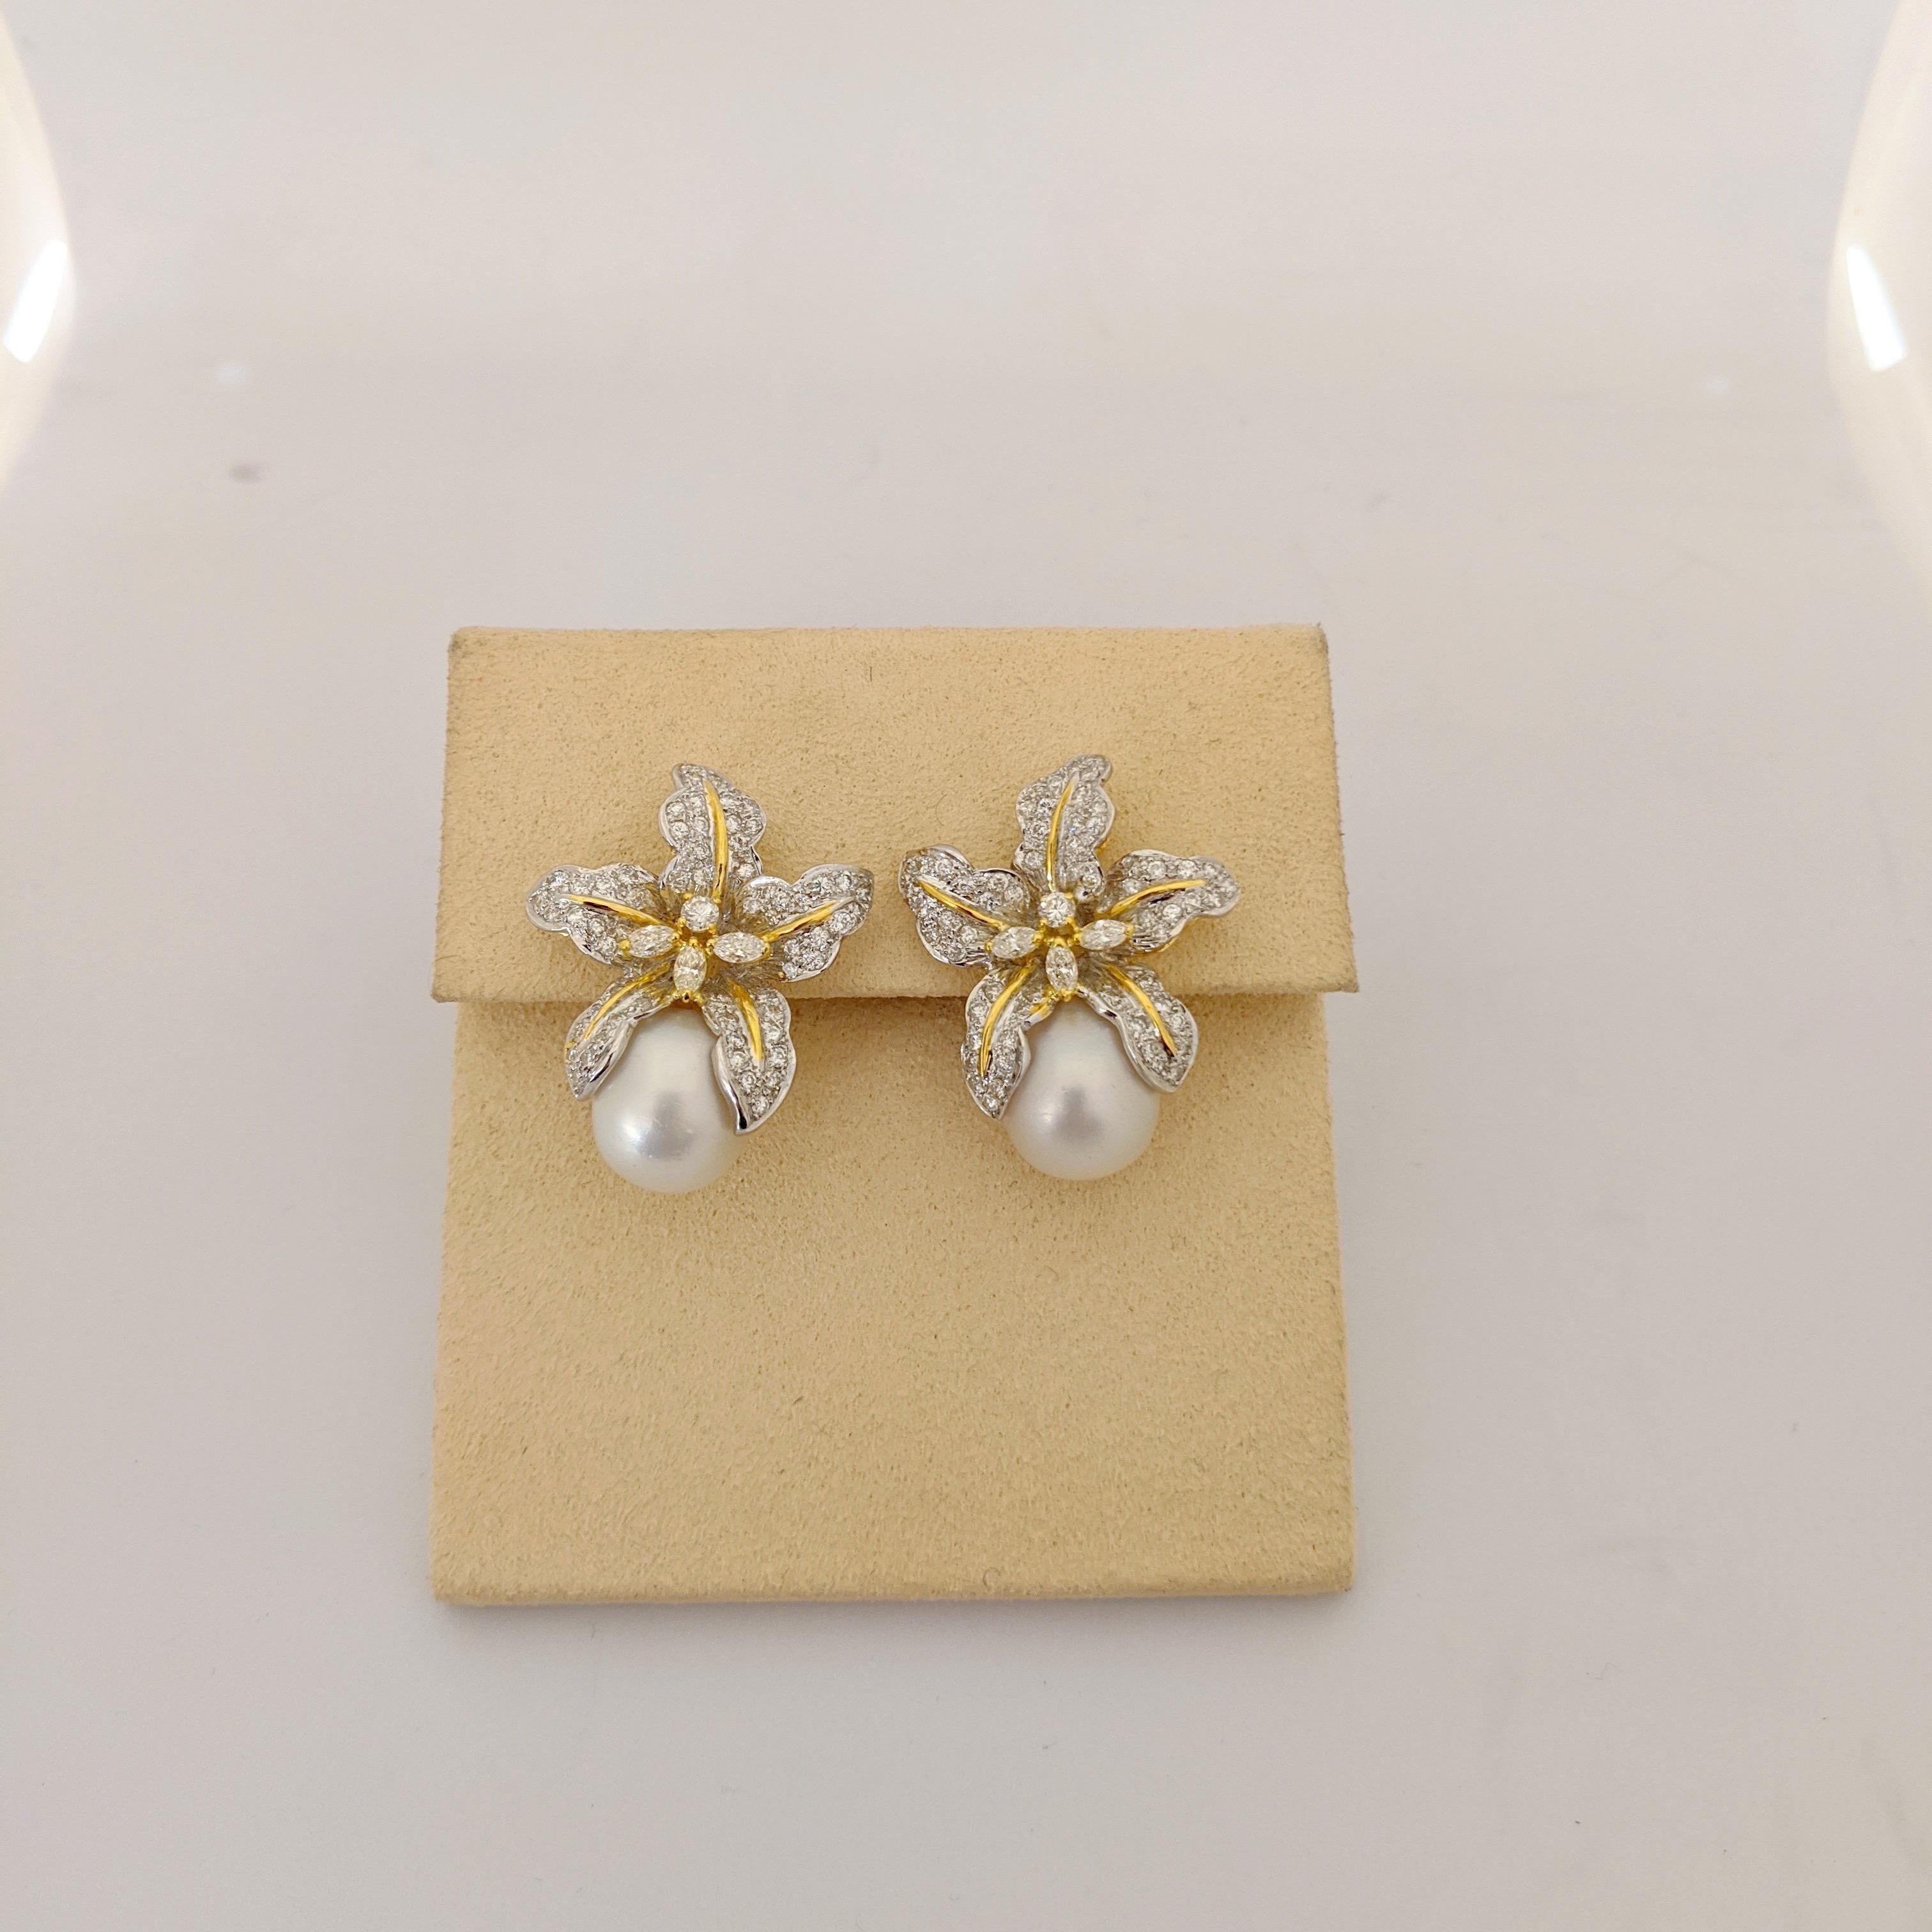 Contemporary Platinum & 18KT 2.80Ct. Diamond Orchid Flower Earrings with South Sea Pearl Drop